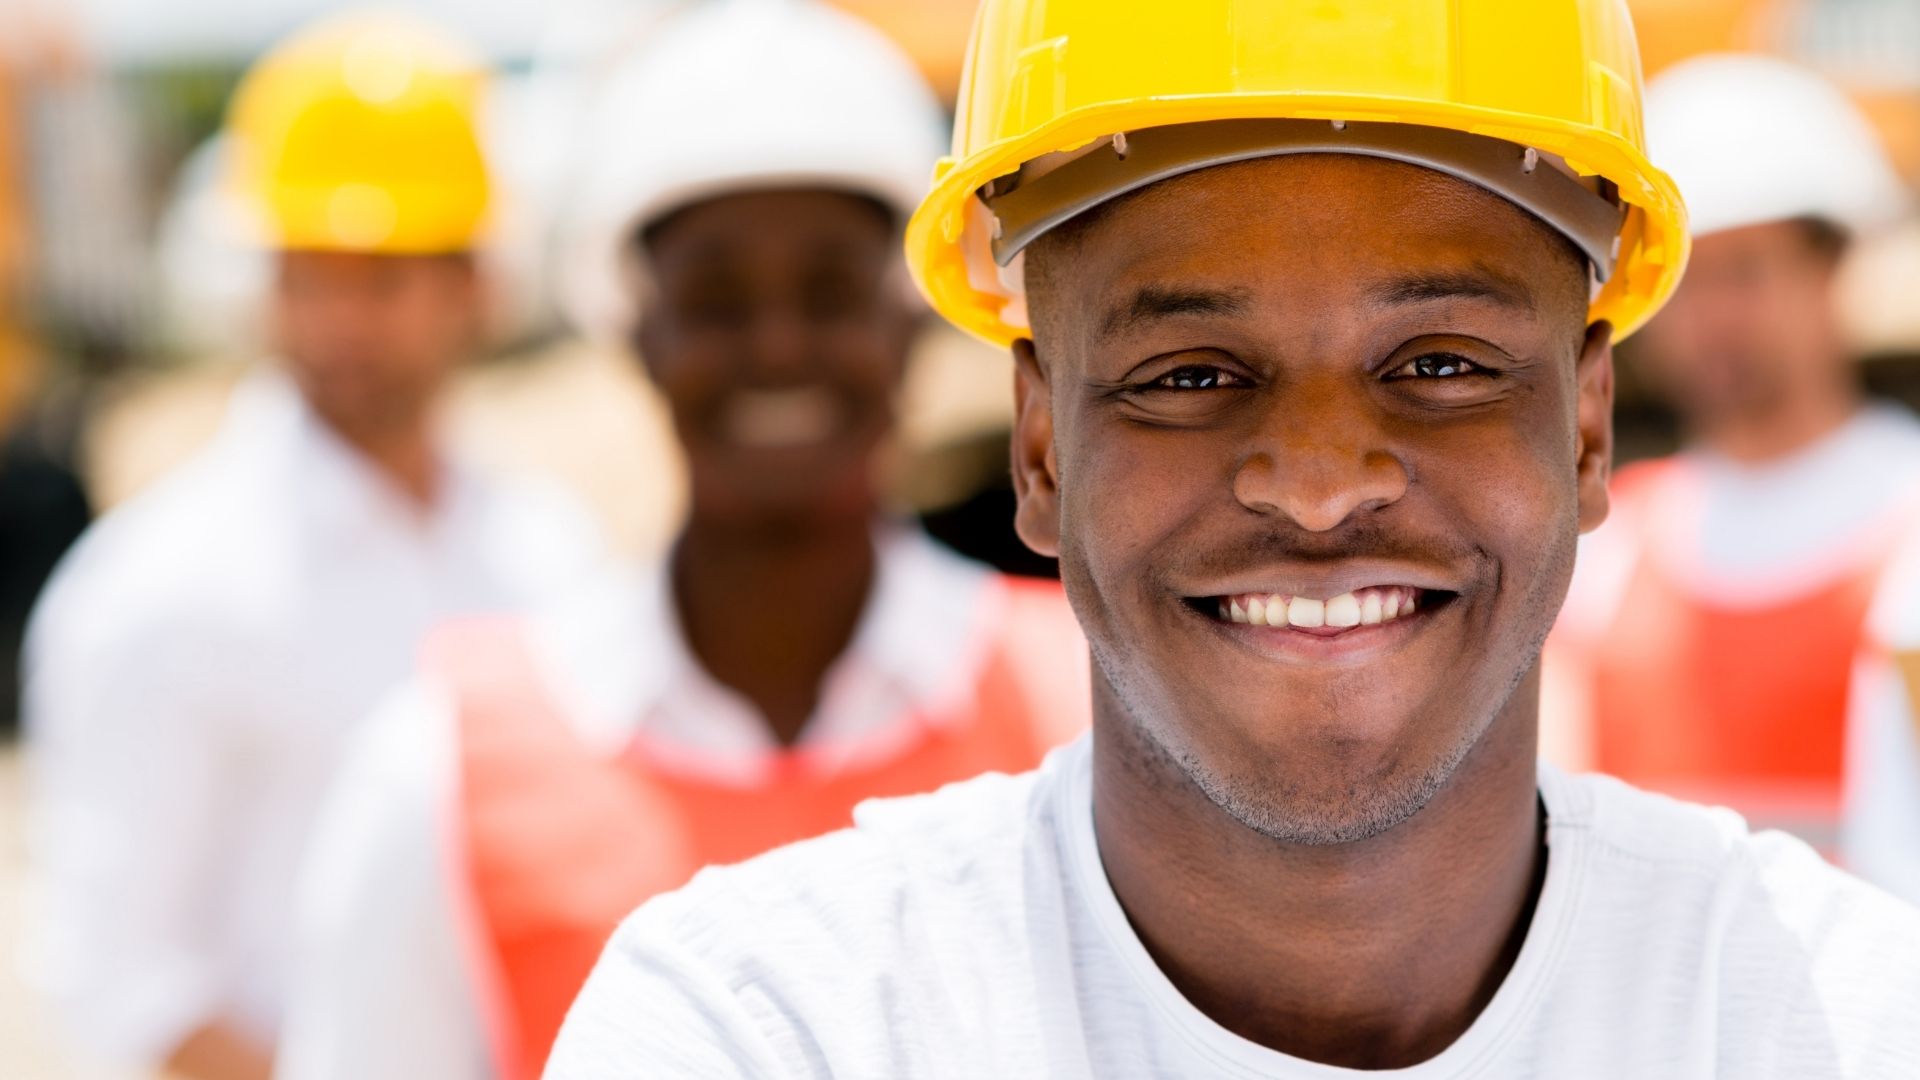 African American Construction Team smiling on the work site